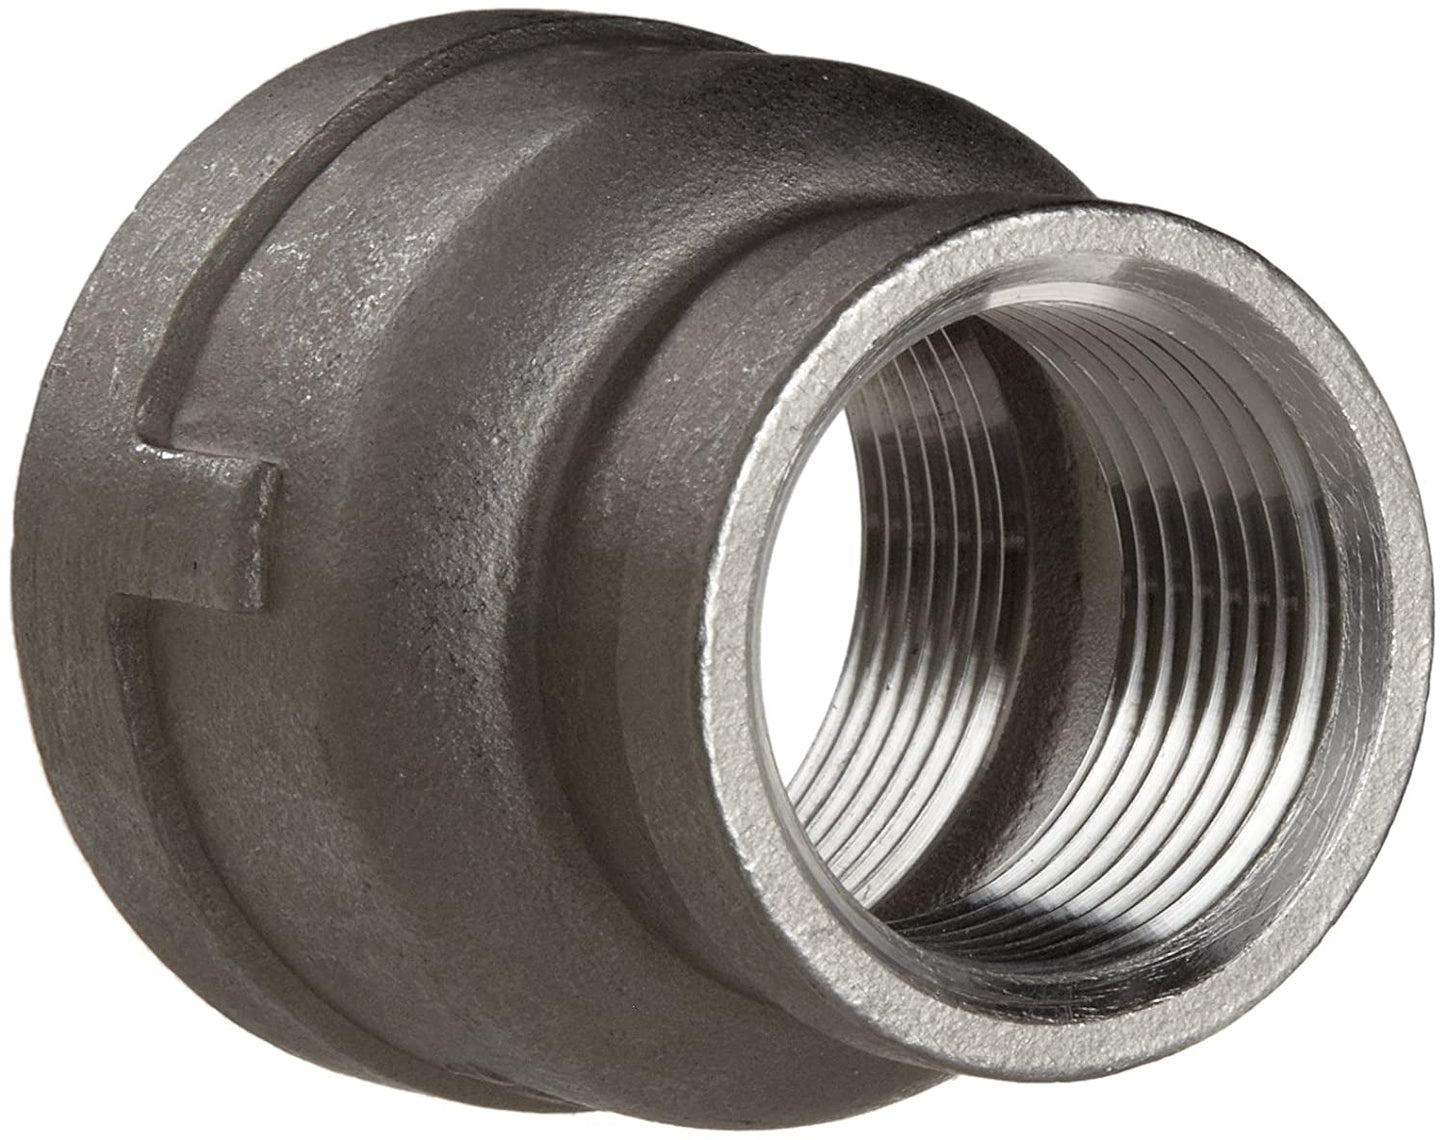 K612-0806 - 1/2" x 3/8" Threaded Reducing Coupling, 316 Stainless Steel